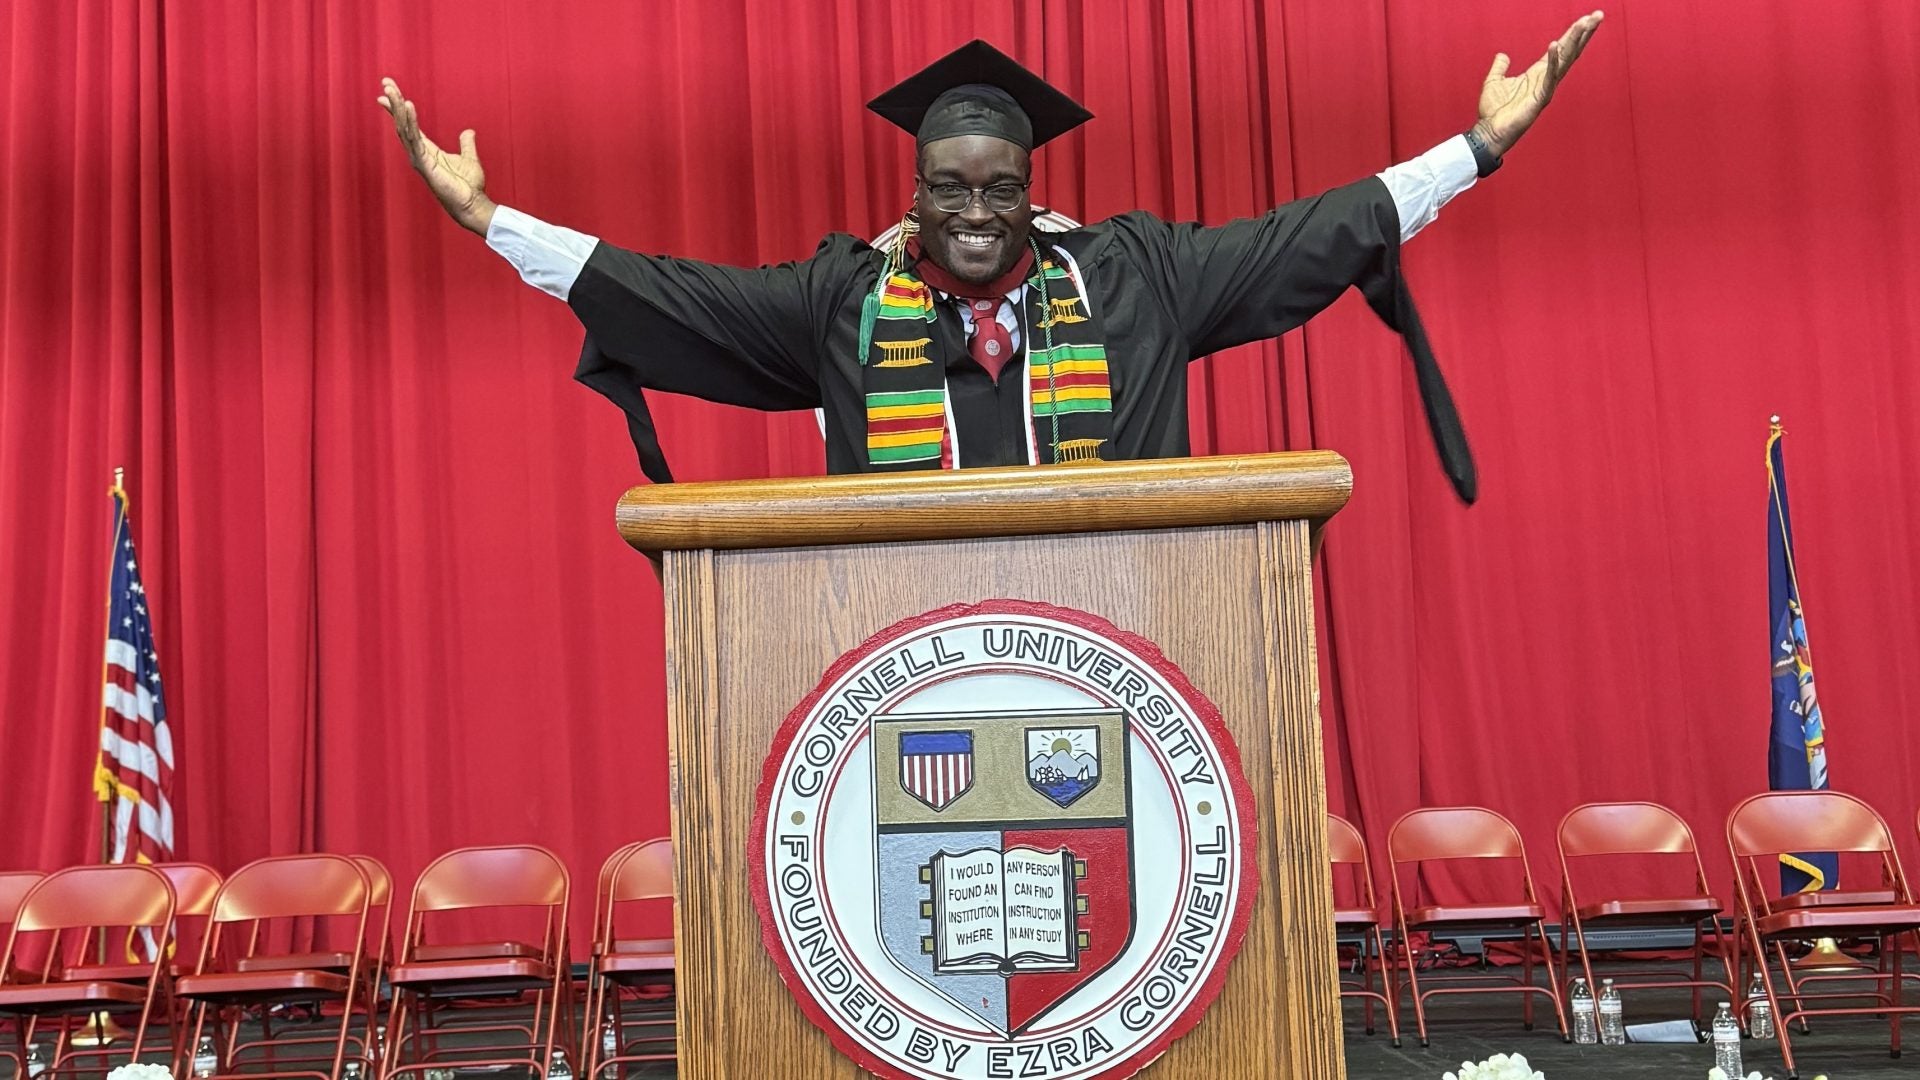 New Jersey Father Goes From Inmate To The Ivy League, Earns Master’s Degree From Cornell University